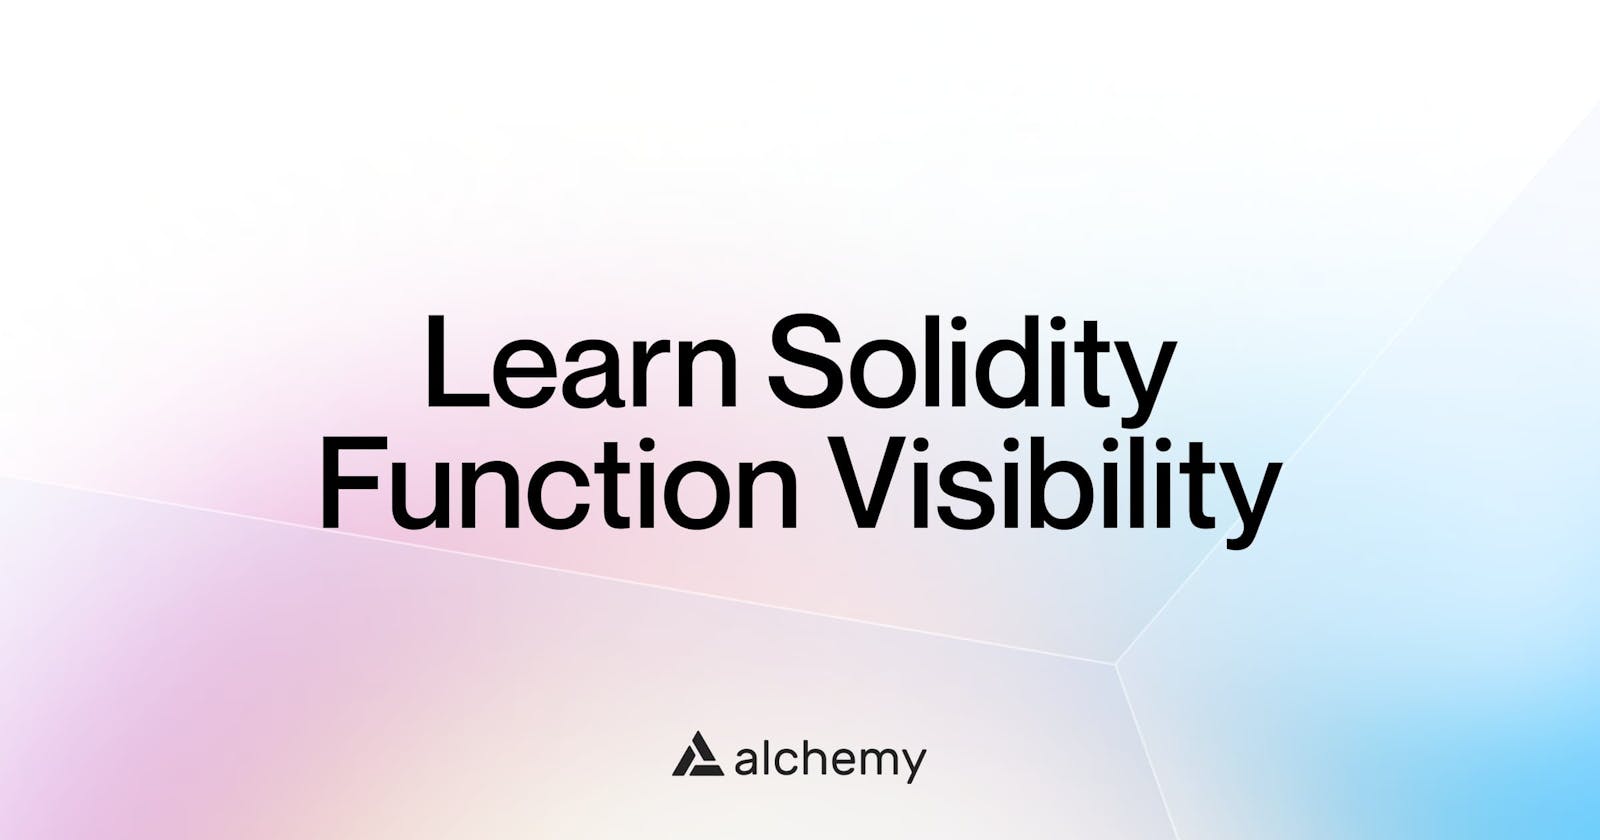 Ways to Execute a function in Solidity